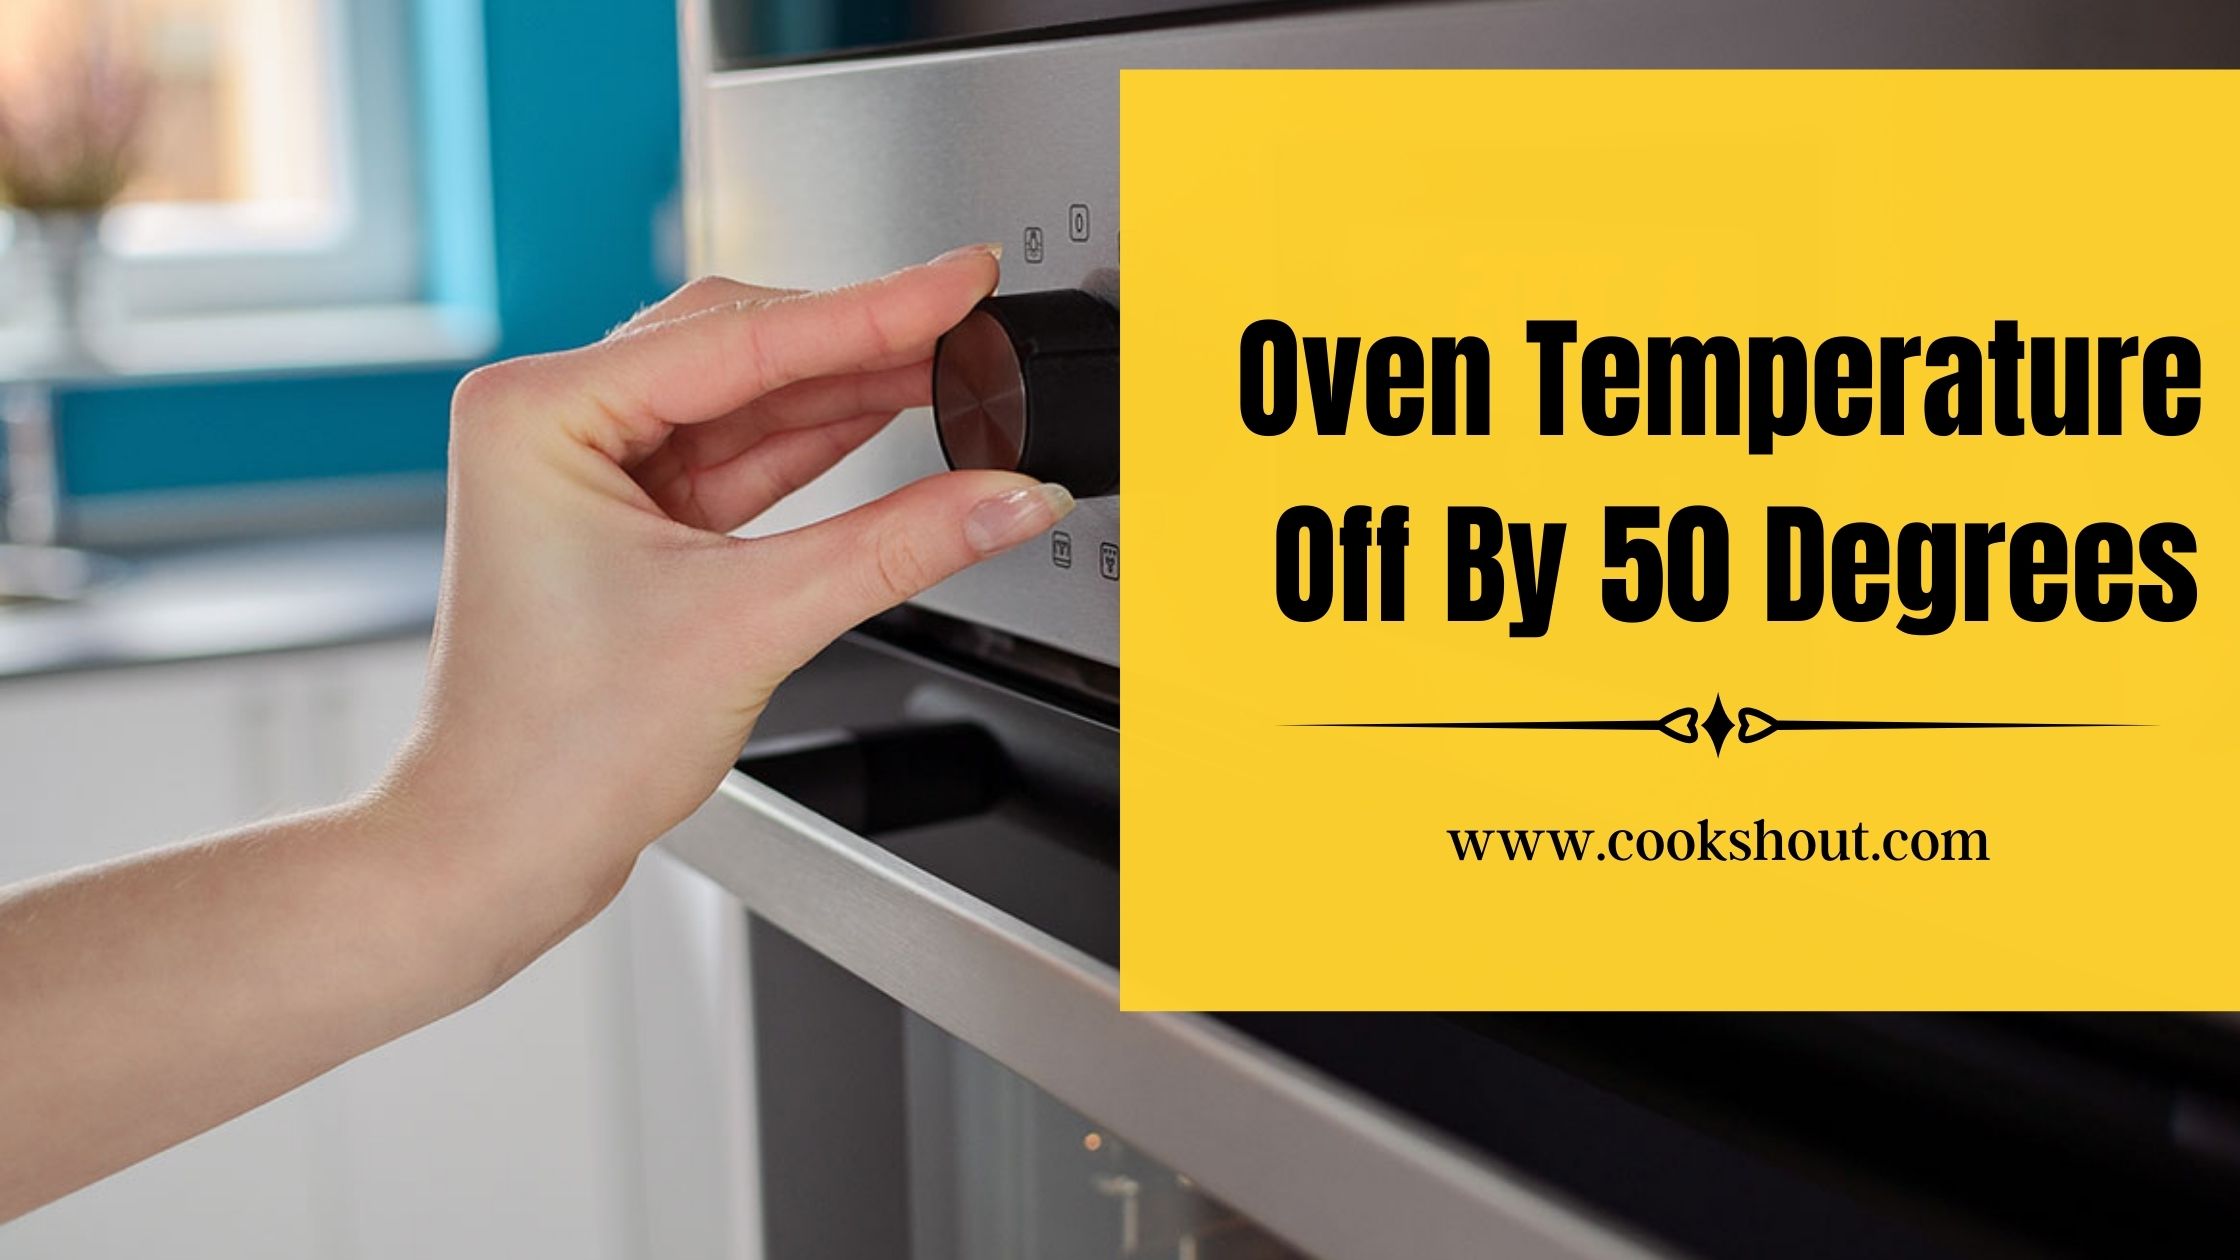 Oven Temperature Off By 50 Degrees